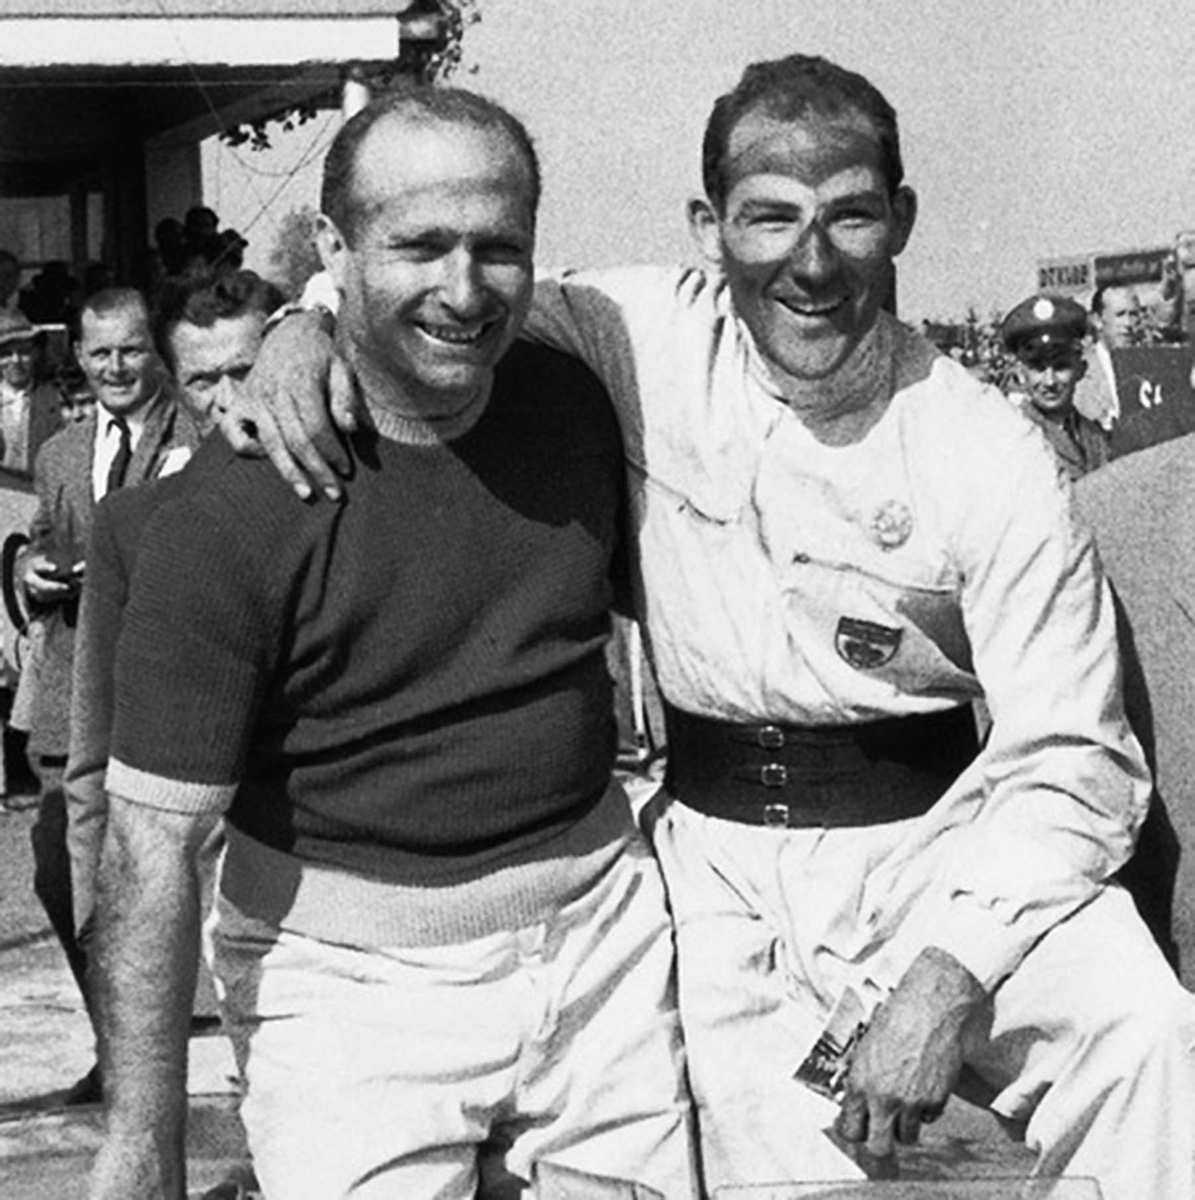 To highlight their cause, kidnappers attempted to take Fangio and rising star Stirling Moss hostage. The kidnappers let Moss go after Fangio lied that Moss was ‘on his honeymoon’. The kidnapping was carried out as a statement to the Cuban Government under Batista.